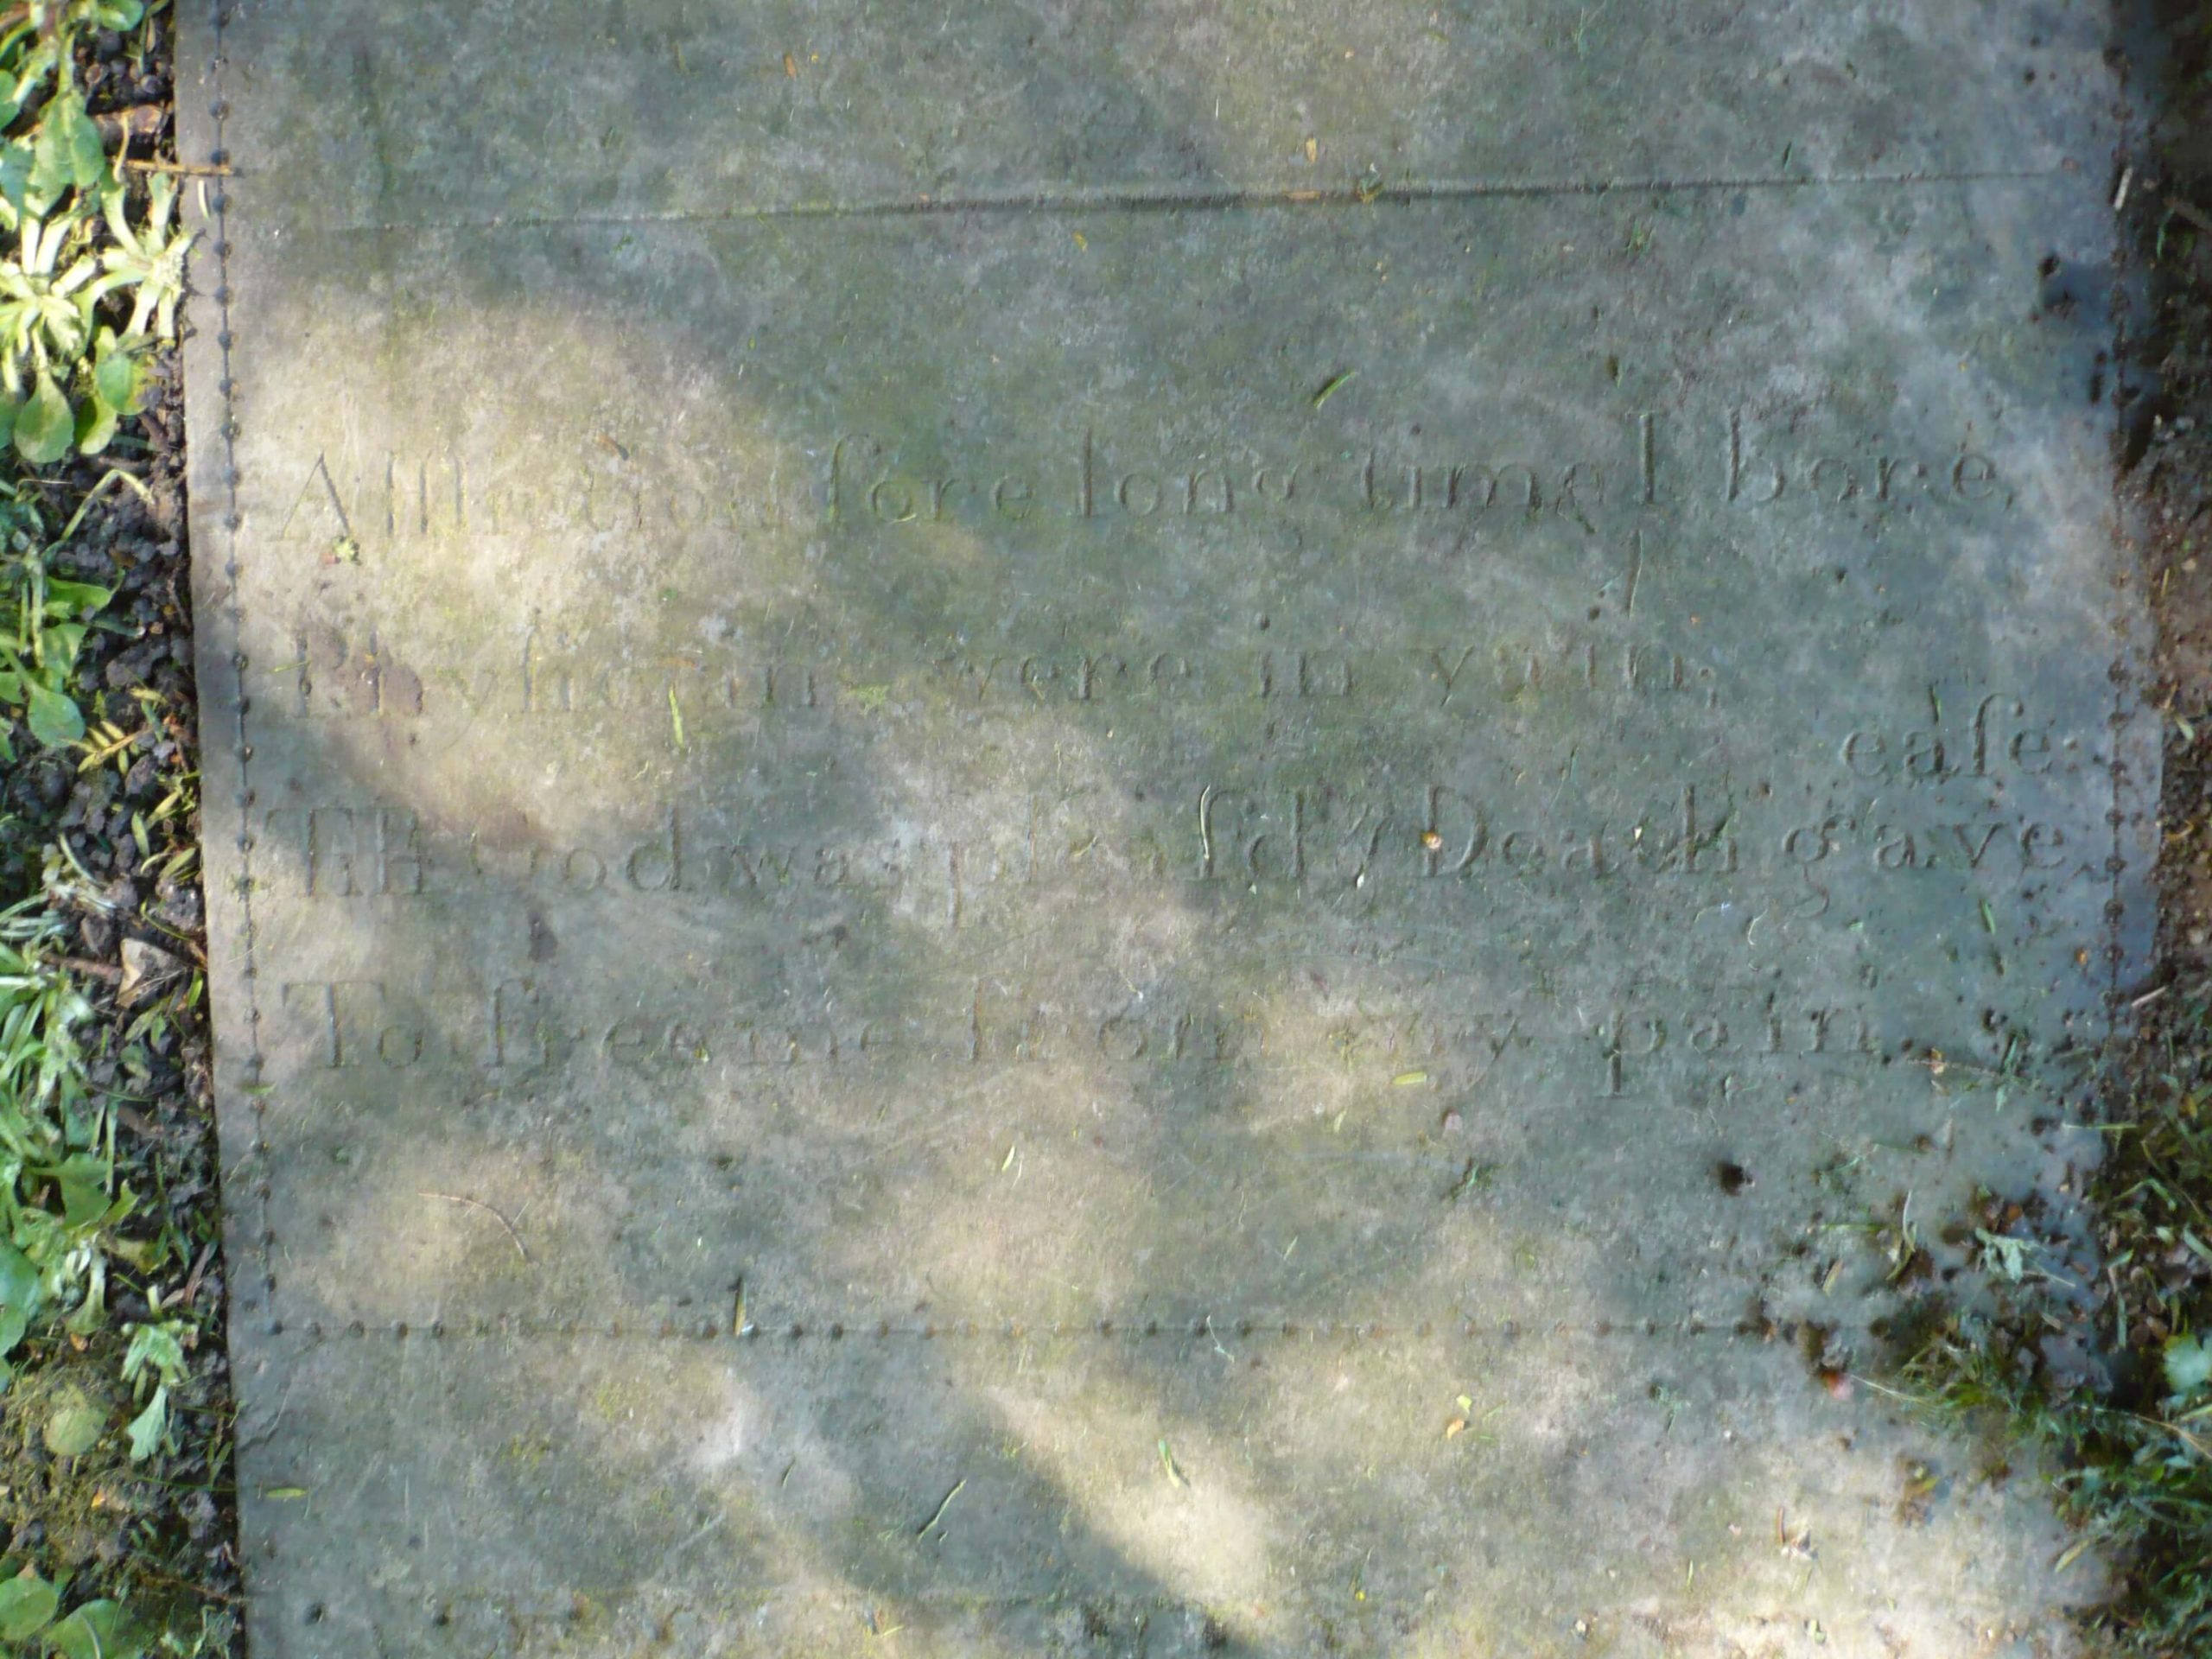 Slate ledger in St Helen's Churchyard, Gumley, leicestershire.